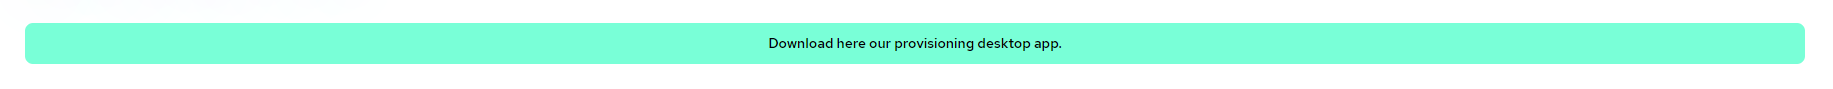 download-provisioning.png